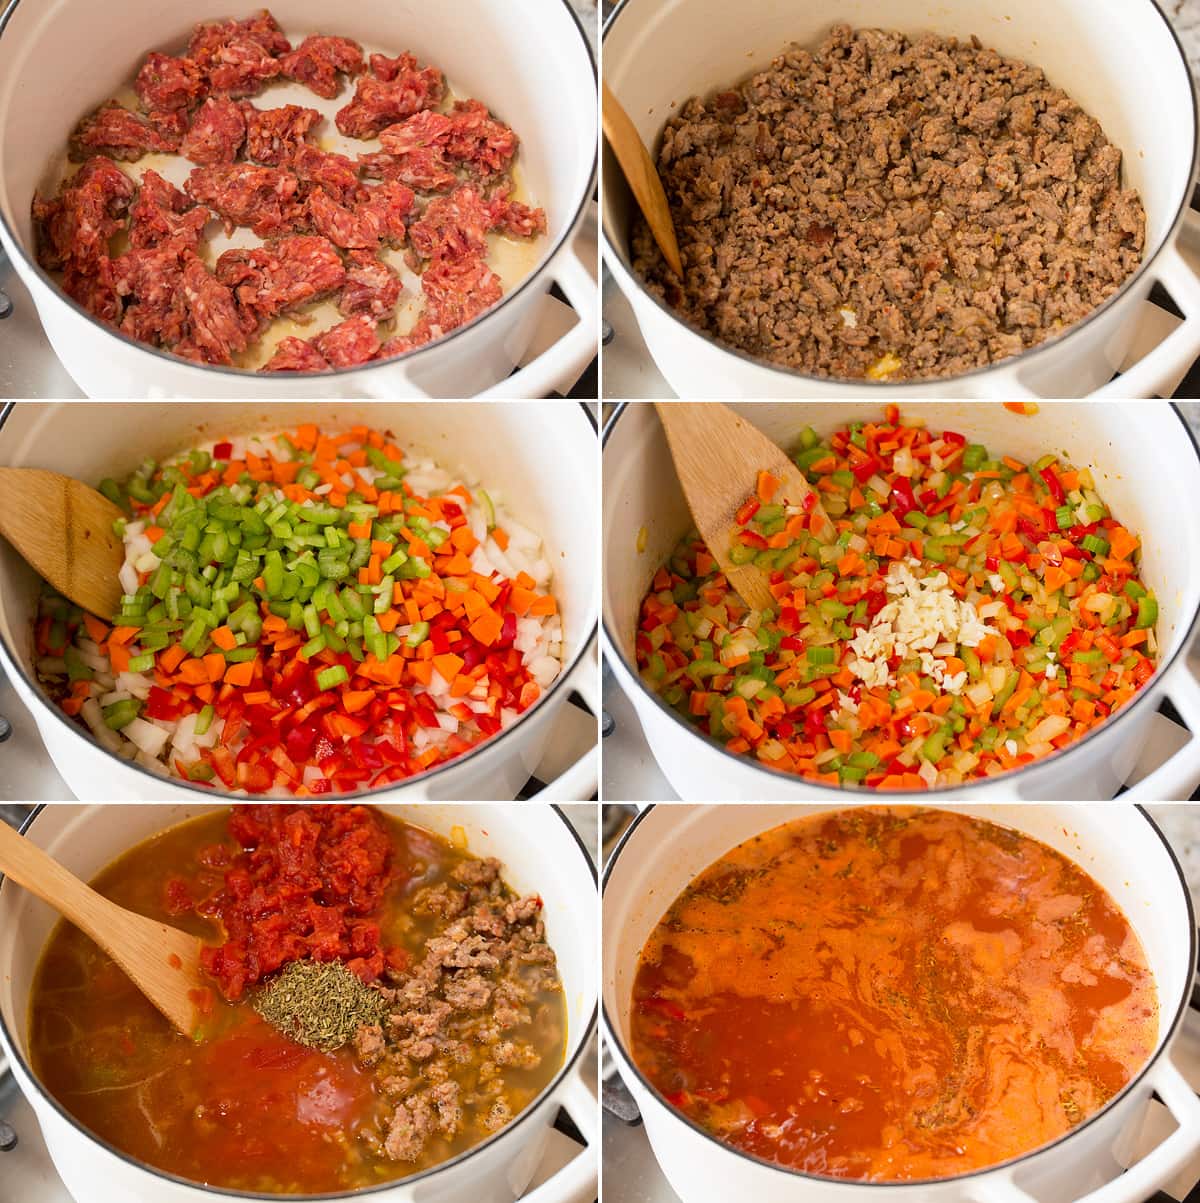 Collage of six images showing steps to making Italian sausage soup. Includes browning sausage, sauteing veggies and adding broth and seasoning.